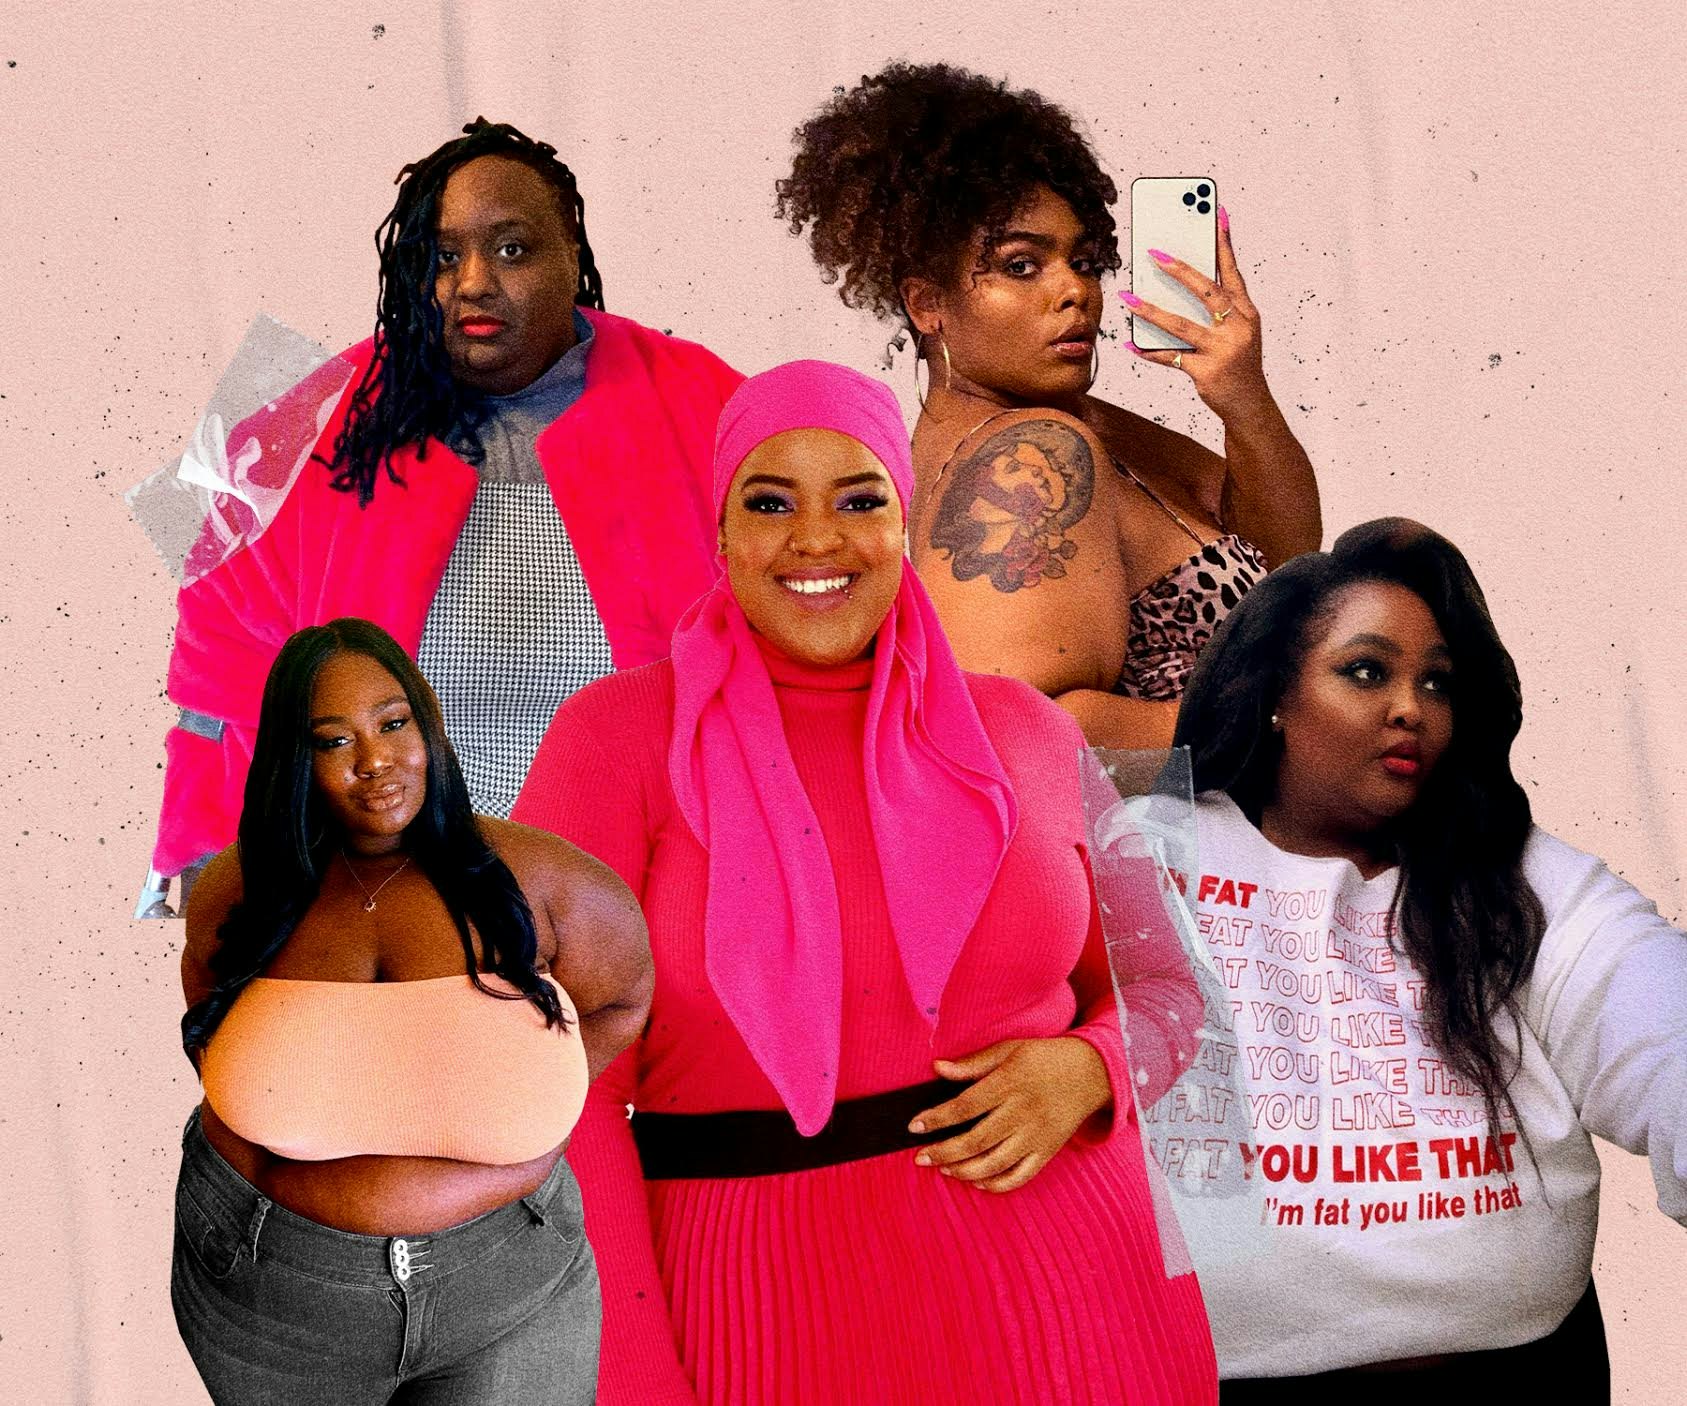 This Brand's Anti-Trolling Body Positivity Campaign Is AMAZING